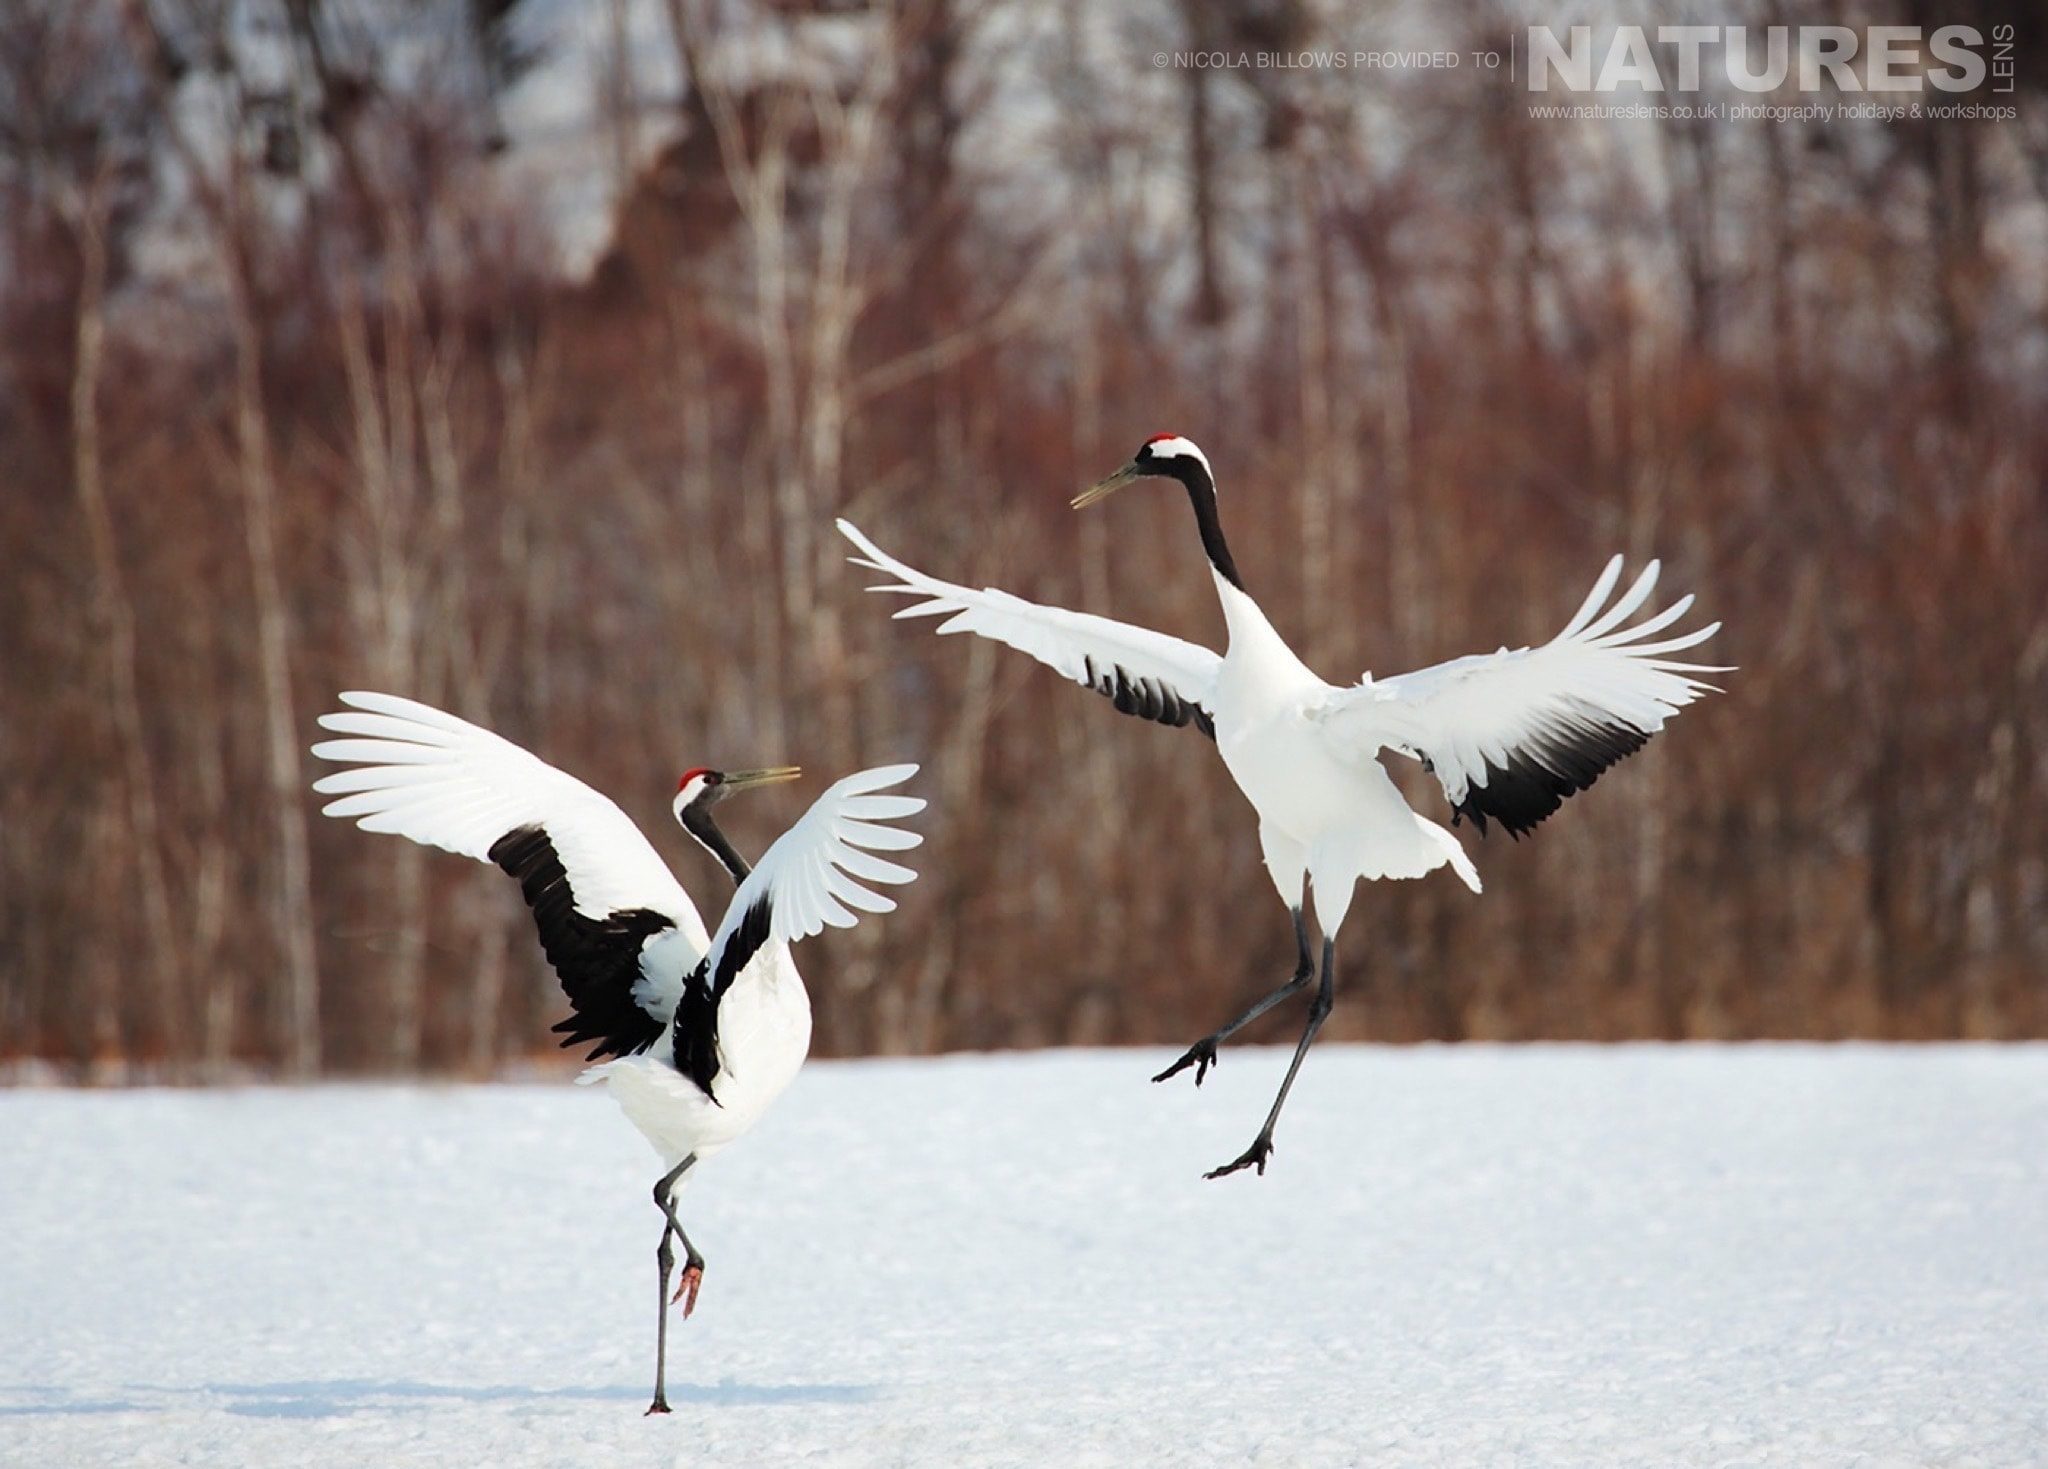 High in the air a duo of red crowned cranes perform their dance on the snowy landscape of Hokkaido photographed by Nicola Billows during the NaturesLens Japanese Winter Wildlife Photography Holiday